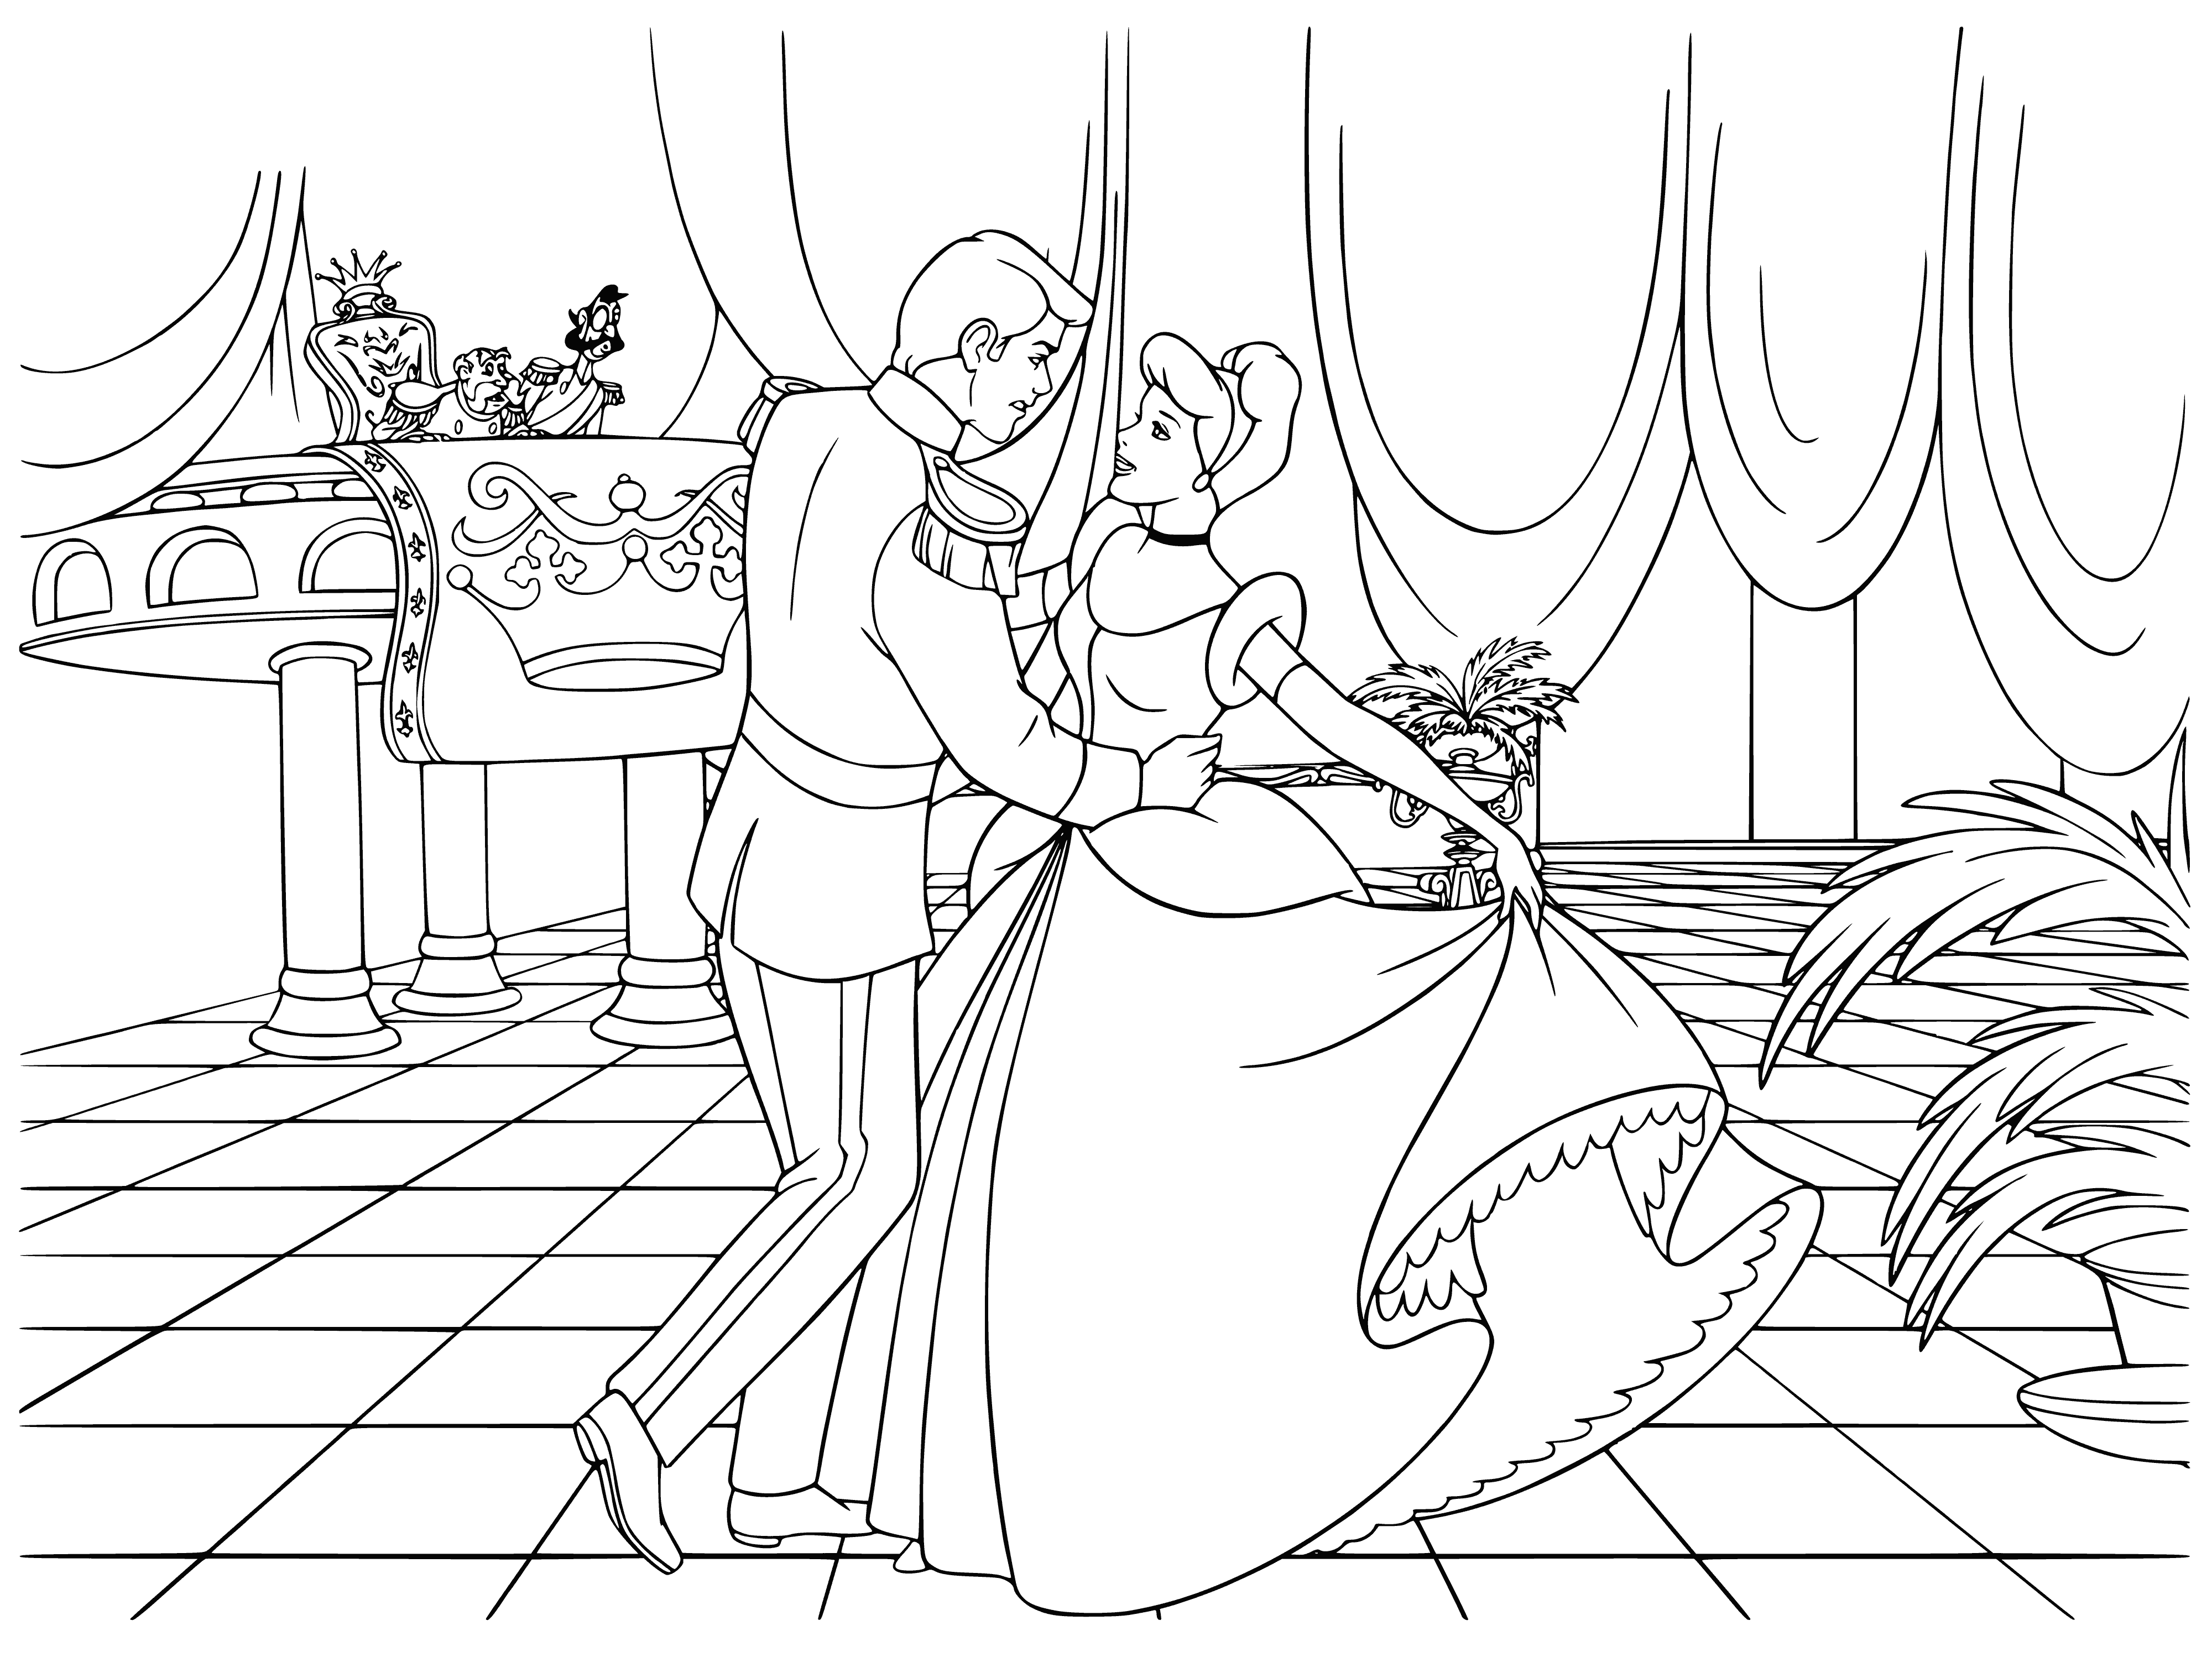 Cinderella and prince dance coloring page